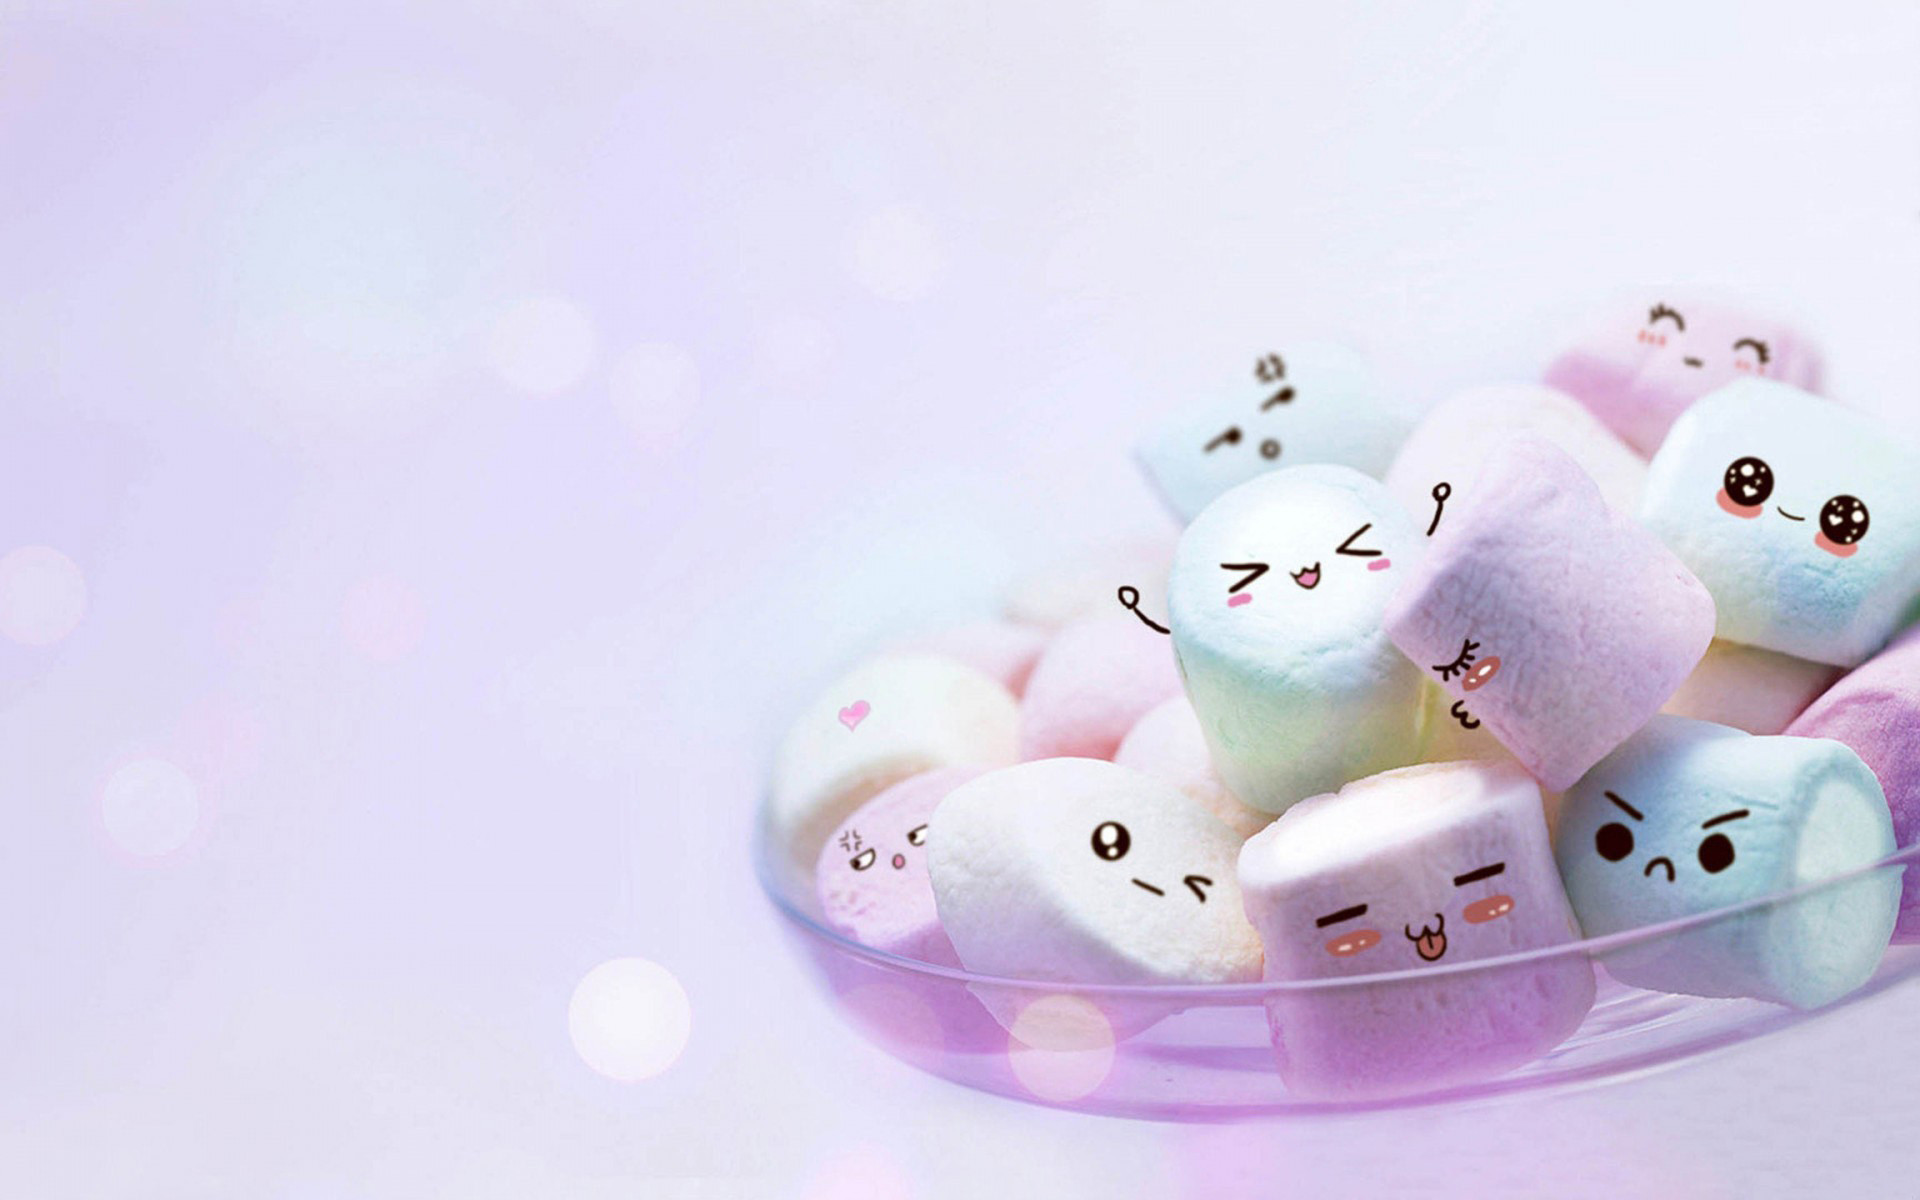 Undefined Marshmallow Wallpaper - Cute Marshmallow Wallpaper Hd - HD Wallpaper 